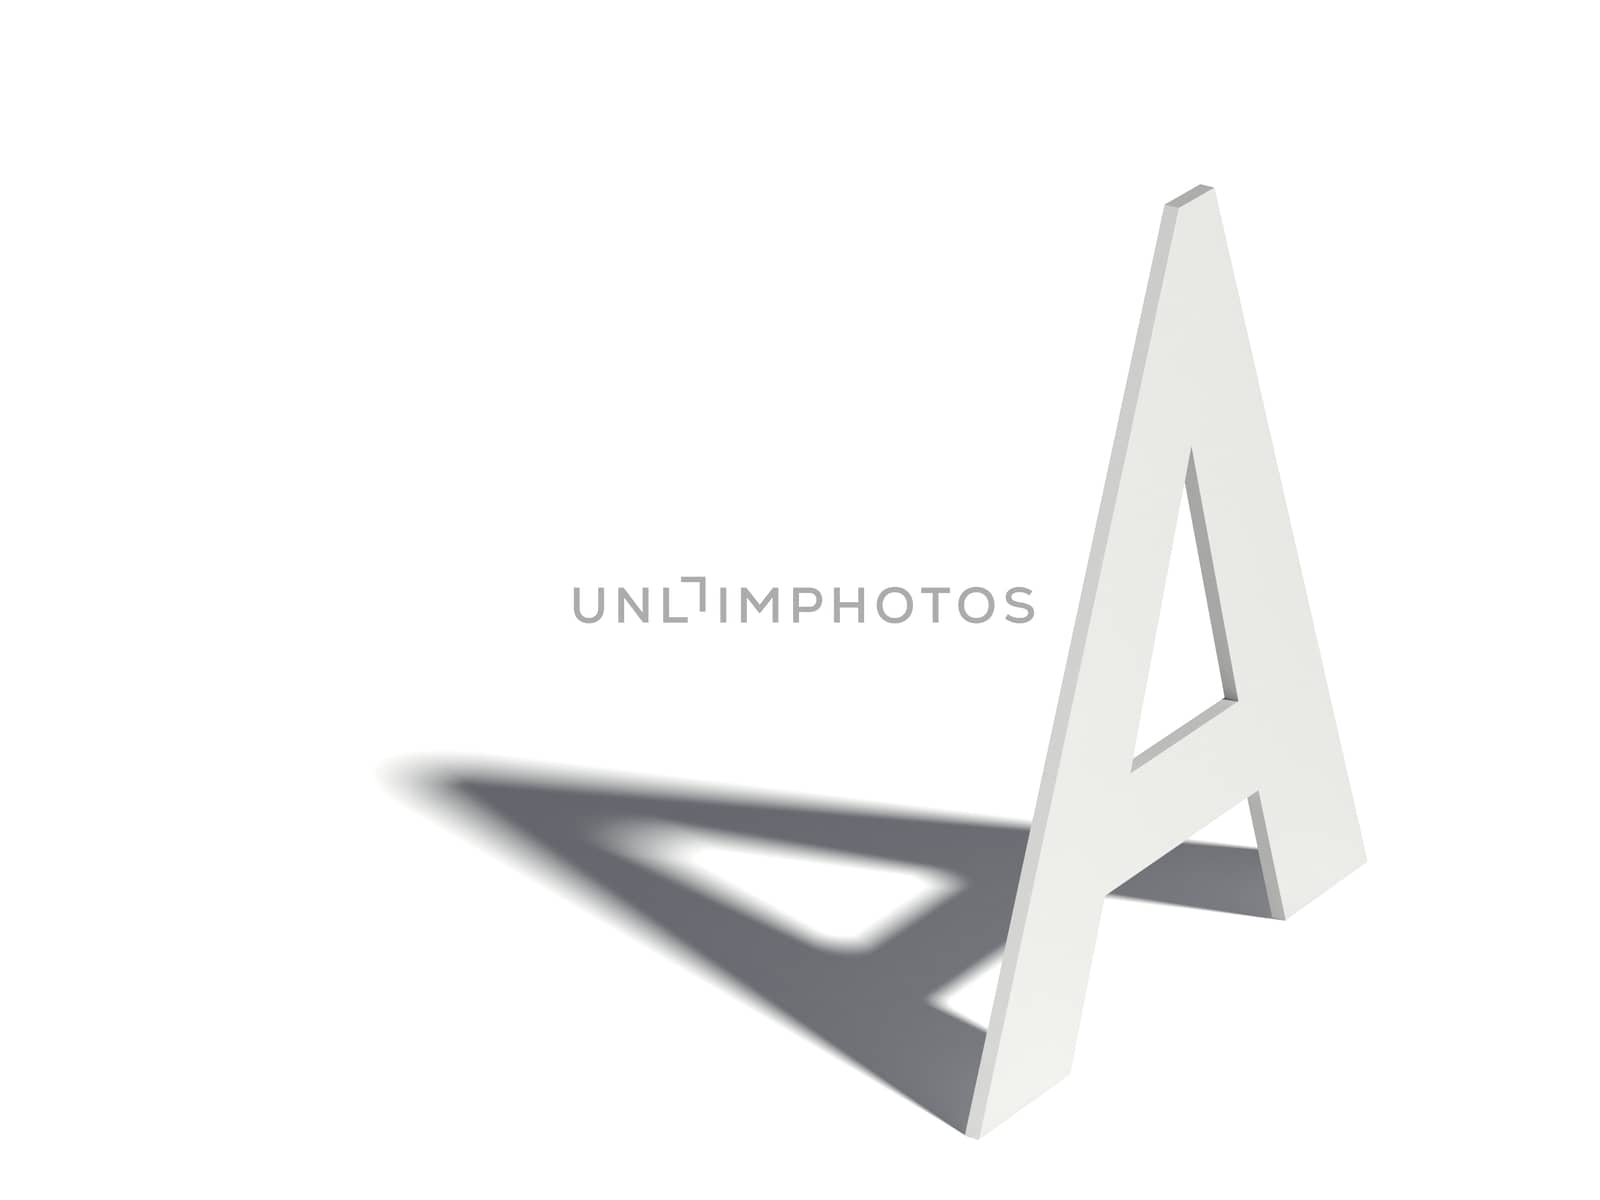 Drop shadow font. Letter A. 3D render illustration isolated on white background